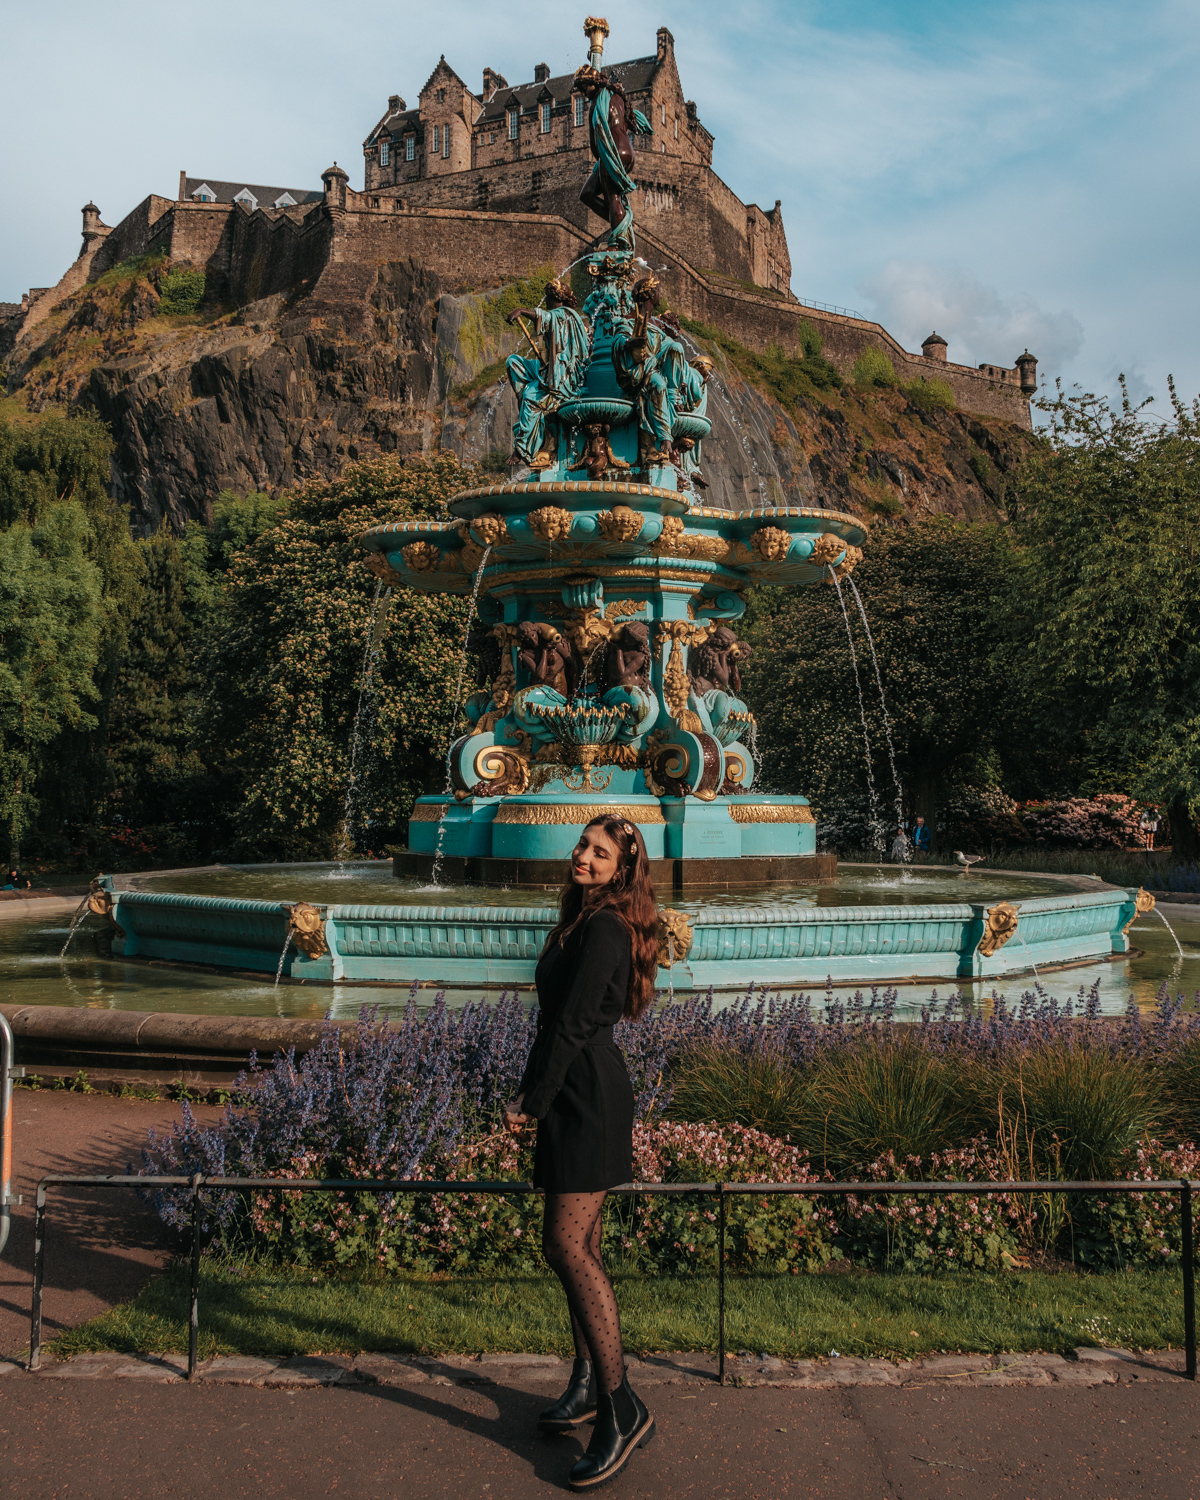 Girl in black dress standing in front of blue and gold fountain below a castle - Ross Fountain in Edinburgh, Scotland
